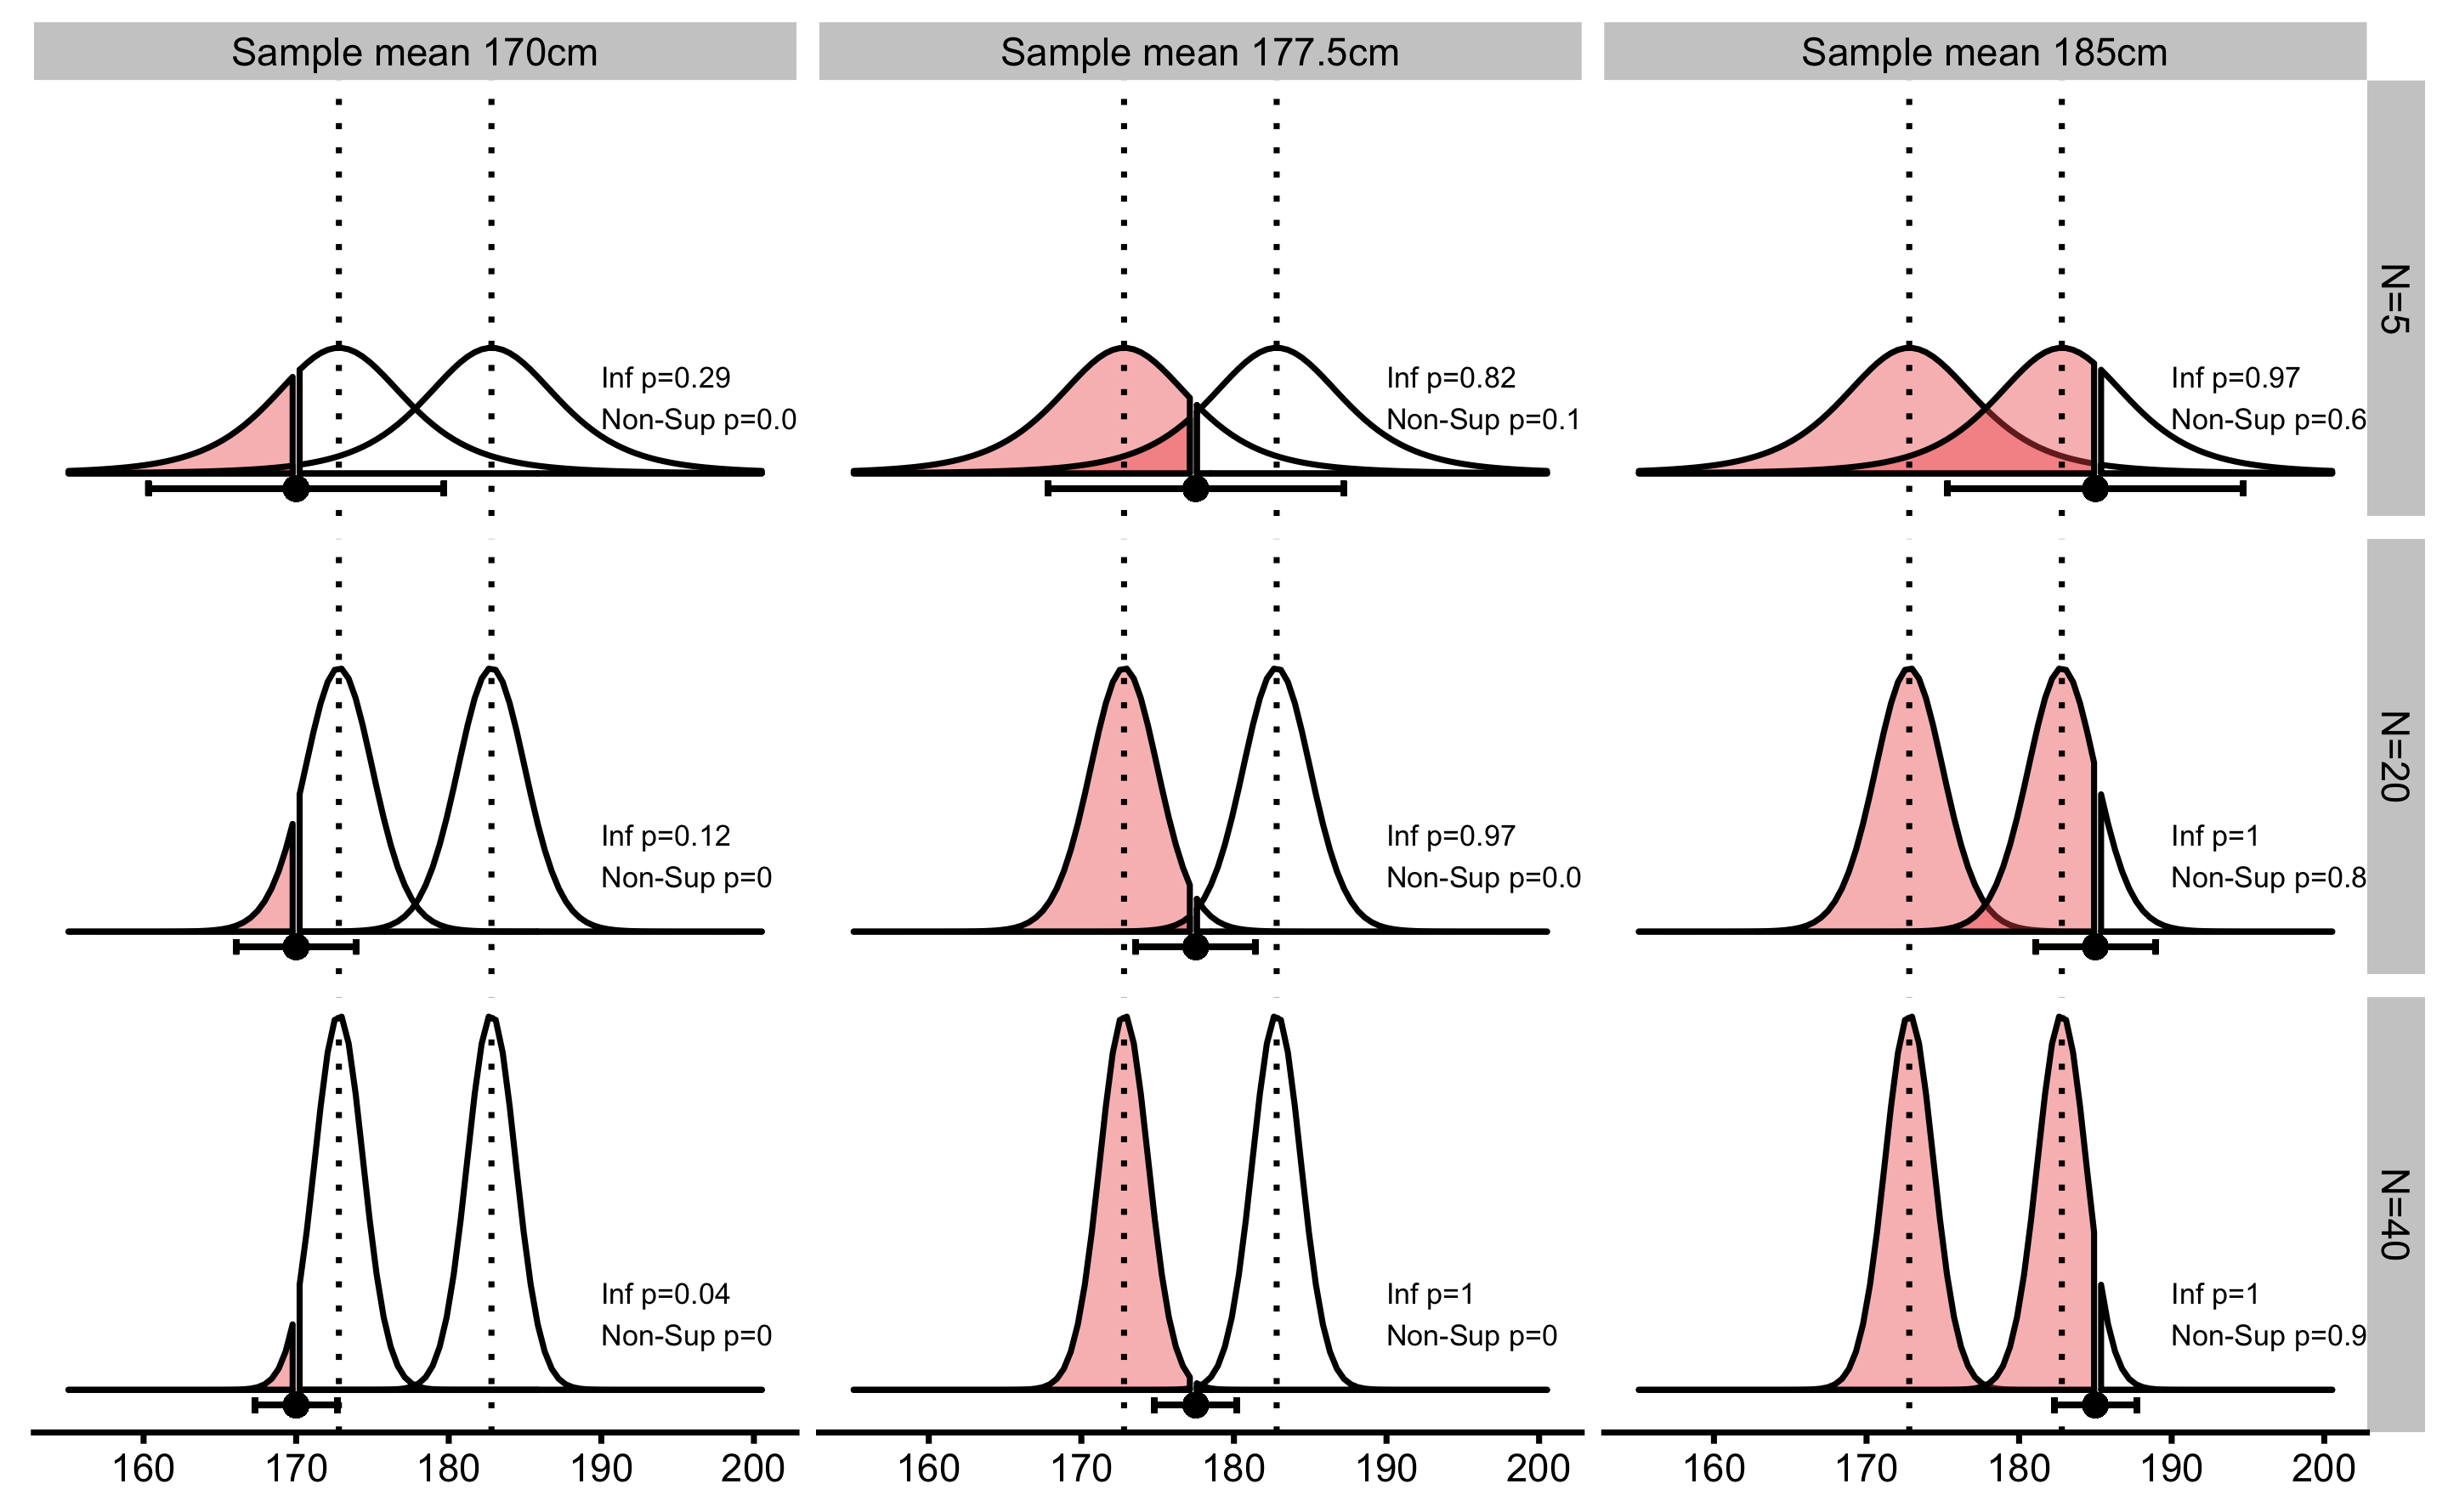 Inferiority and Non-Superiority tests. Similar to equivalence test using TOST procedure, inferiority and non-superiority tests involve two one-sided NHSTs at SESOI thresholds in the negative direction. Error bars represent 90% confidence intervals.